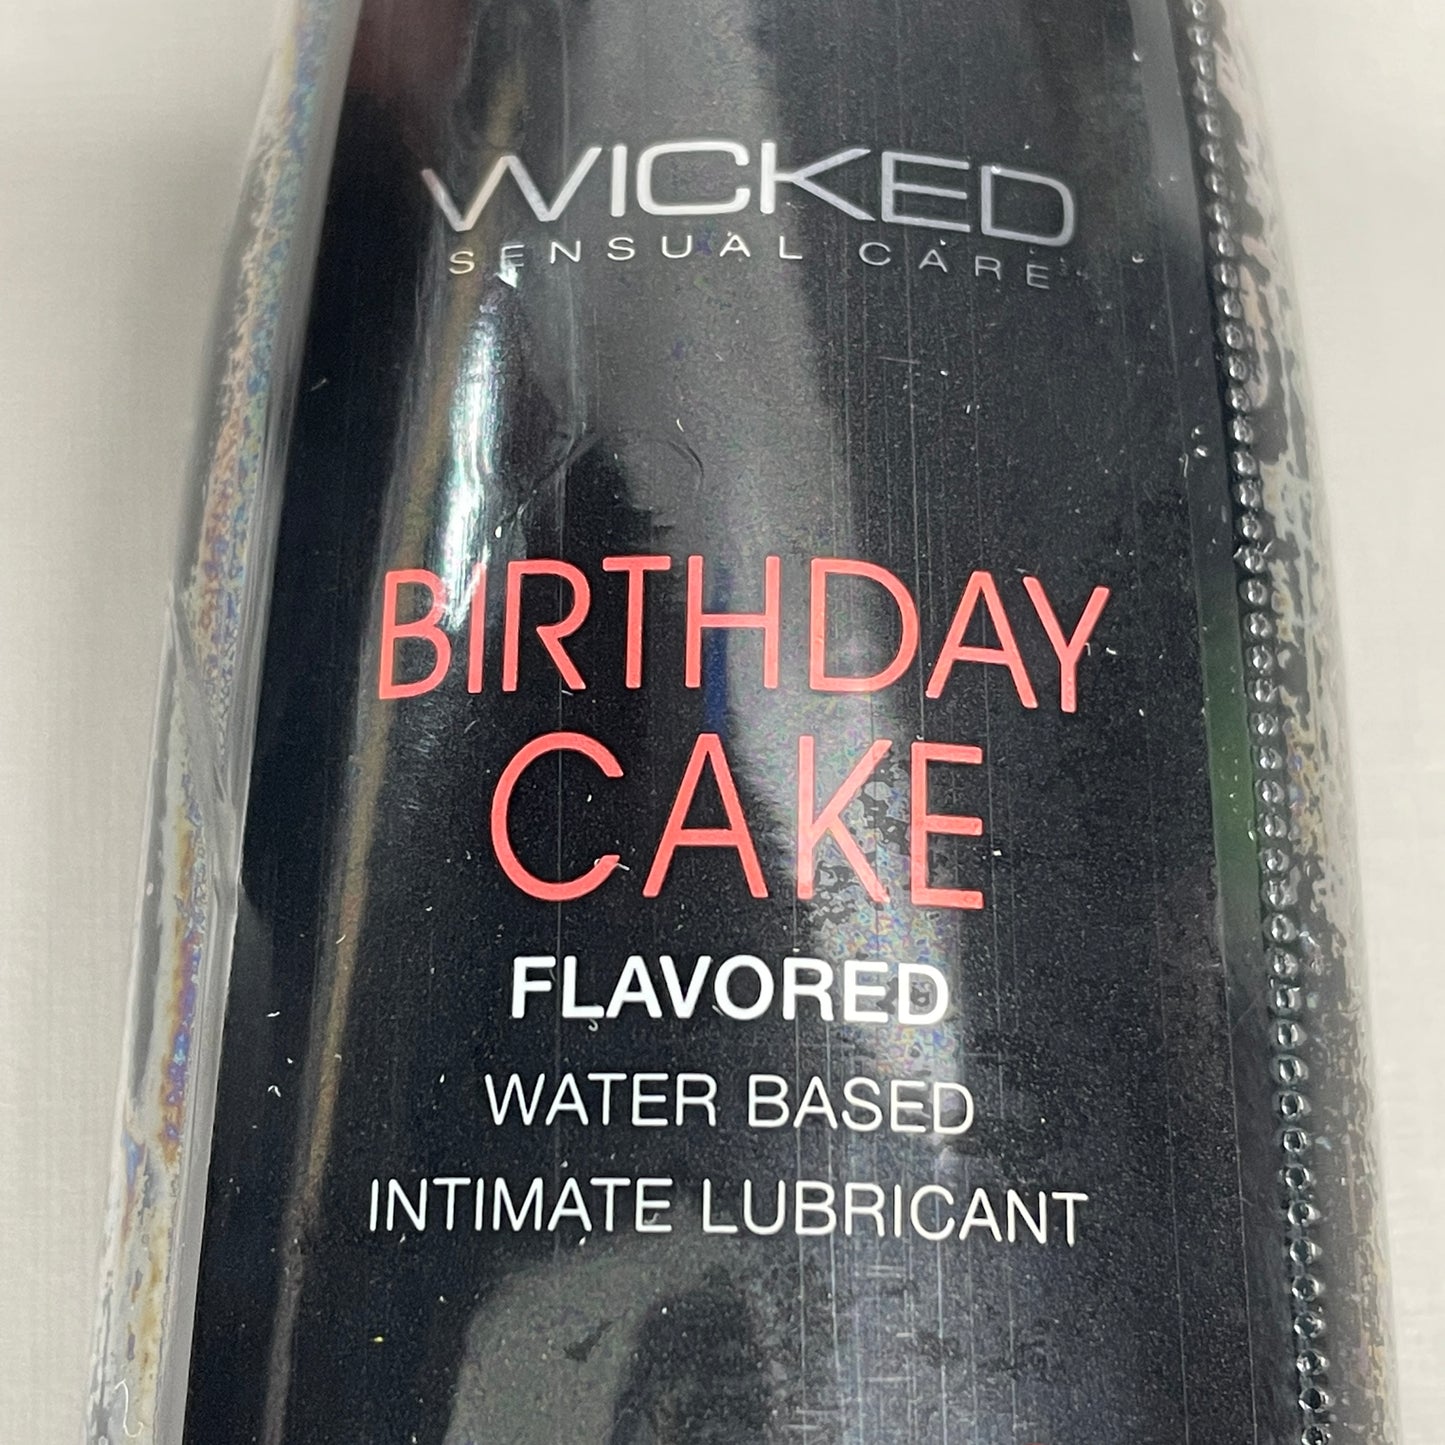 WICKED SENSUAL CARE Birthday Cake Flavored Water Based Intimate Lubricant 2 oz 03/24 (New)